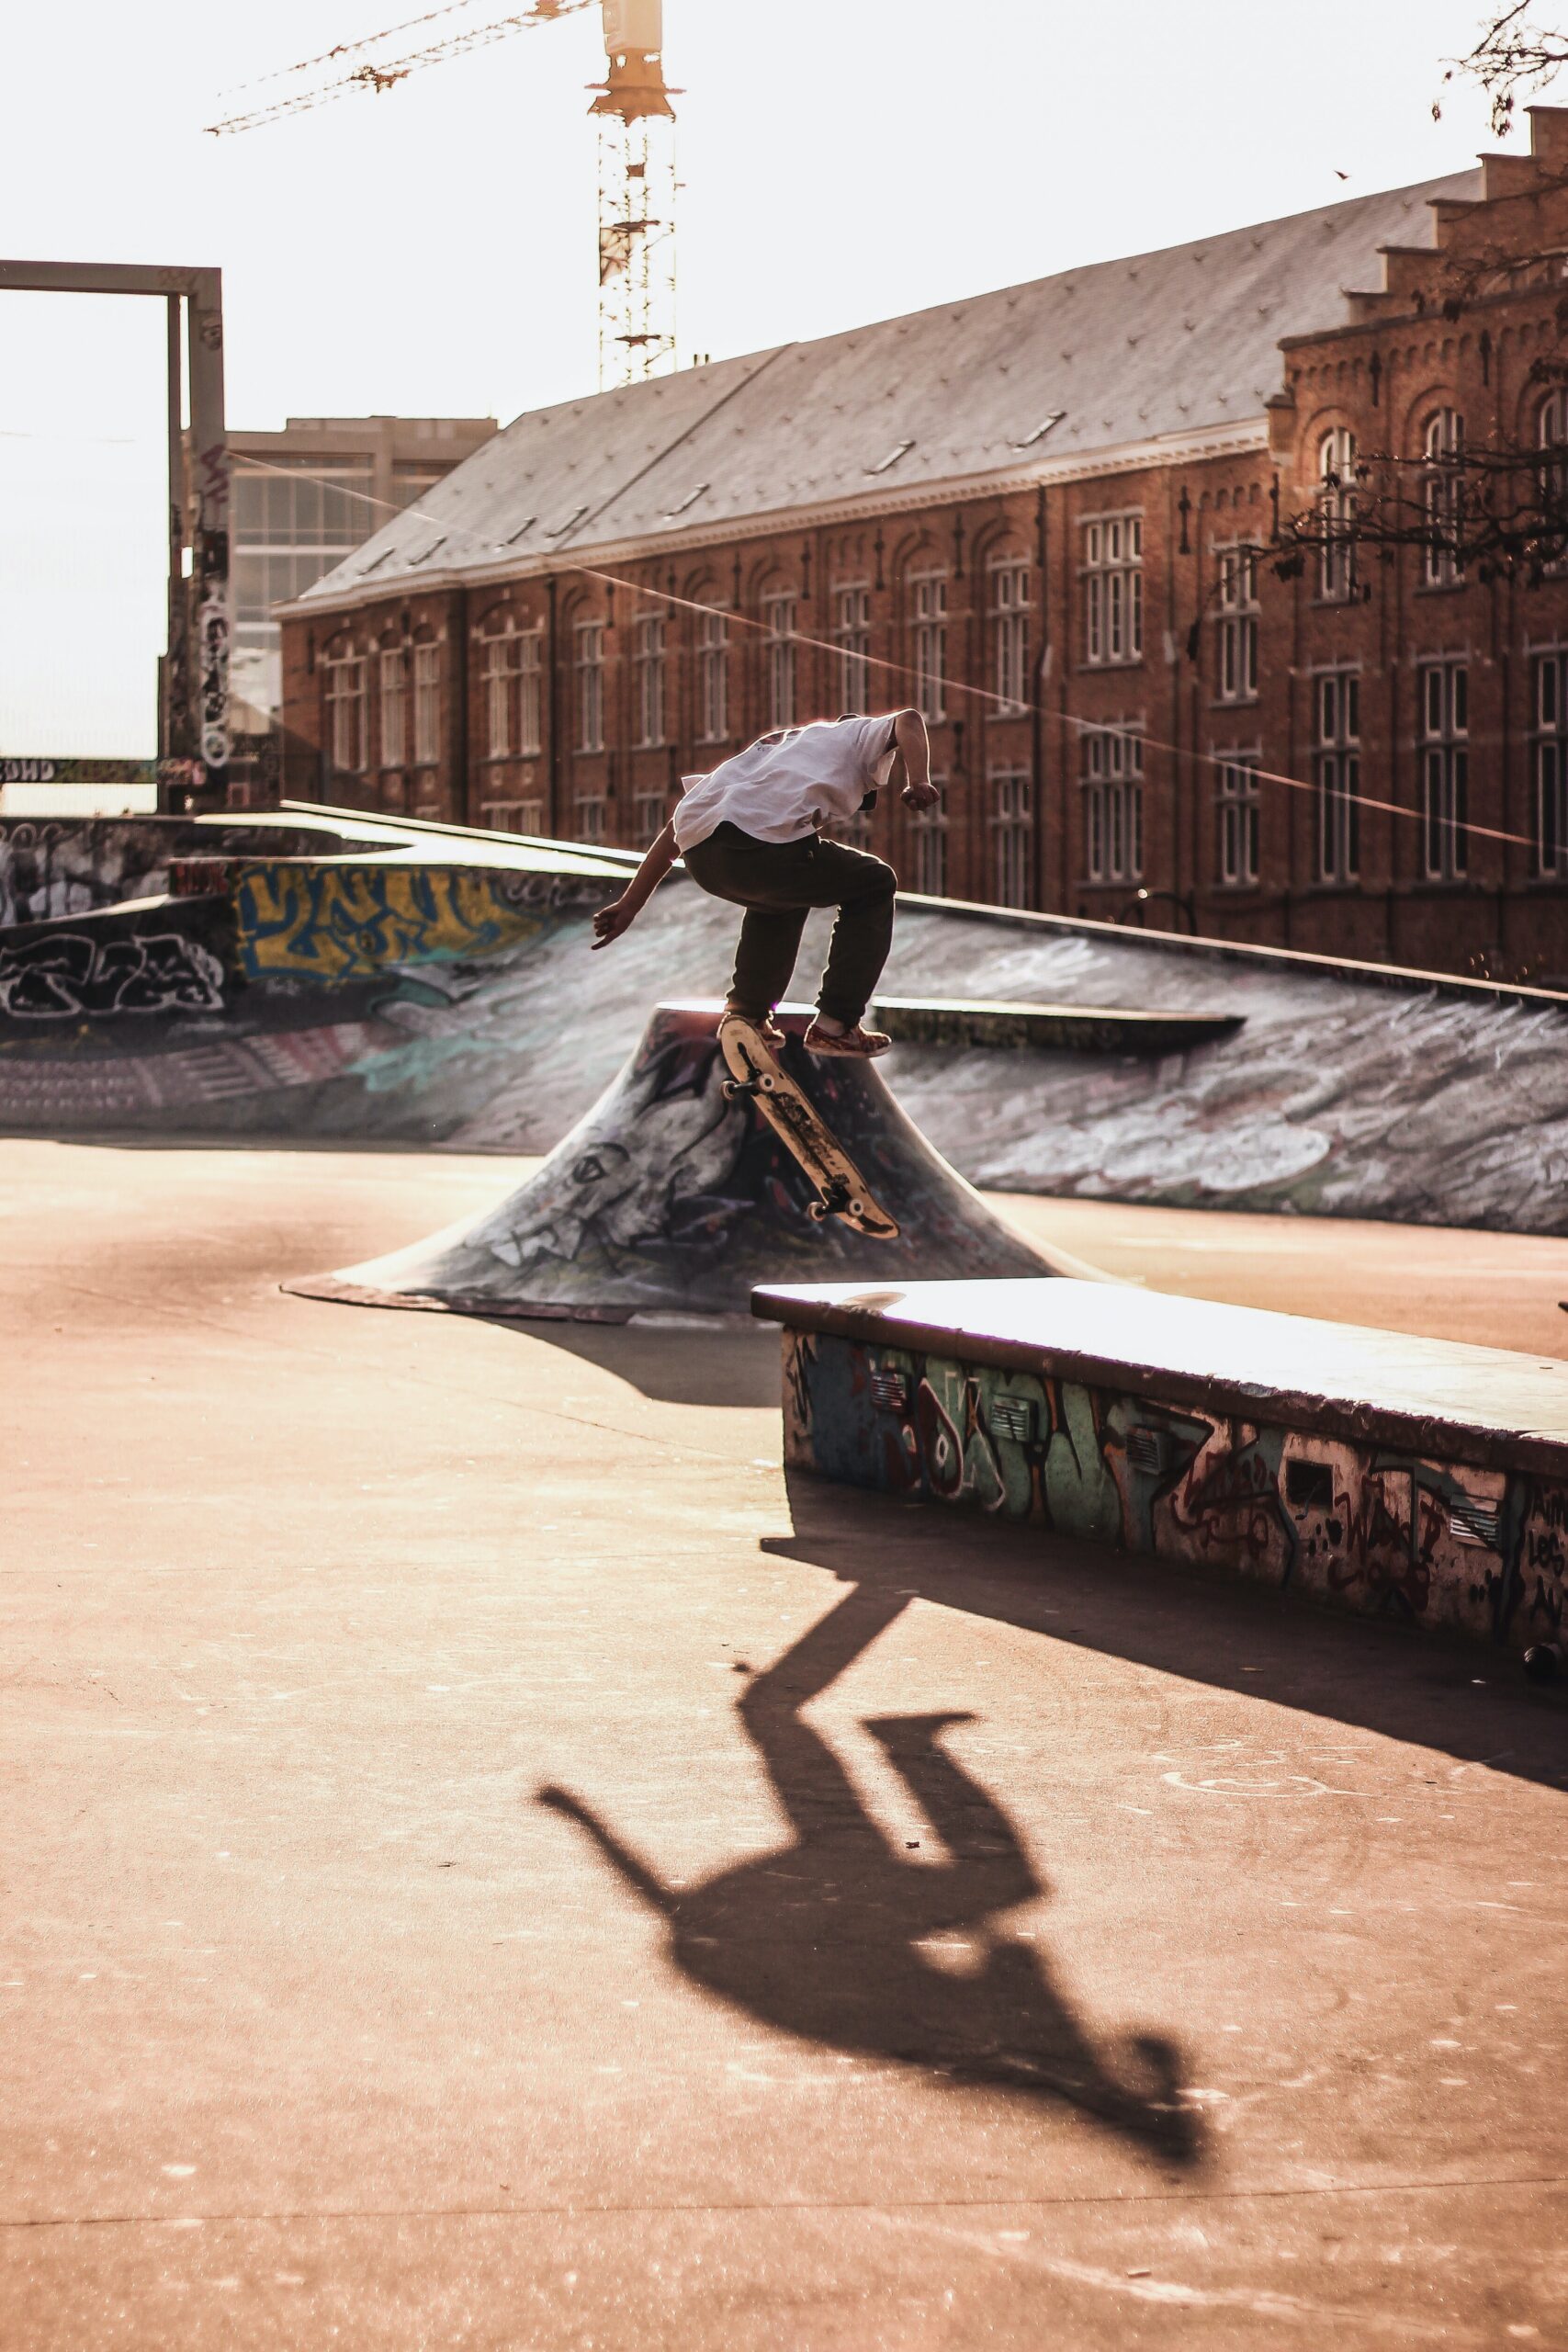 What Are The Key Considerations For Choosing The Right Skateboarding Shoes?